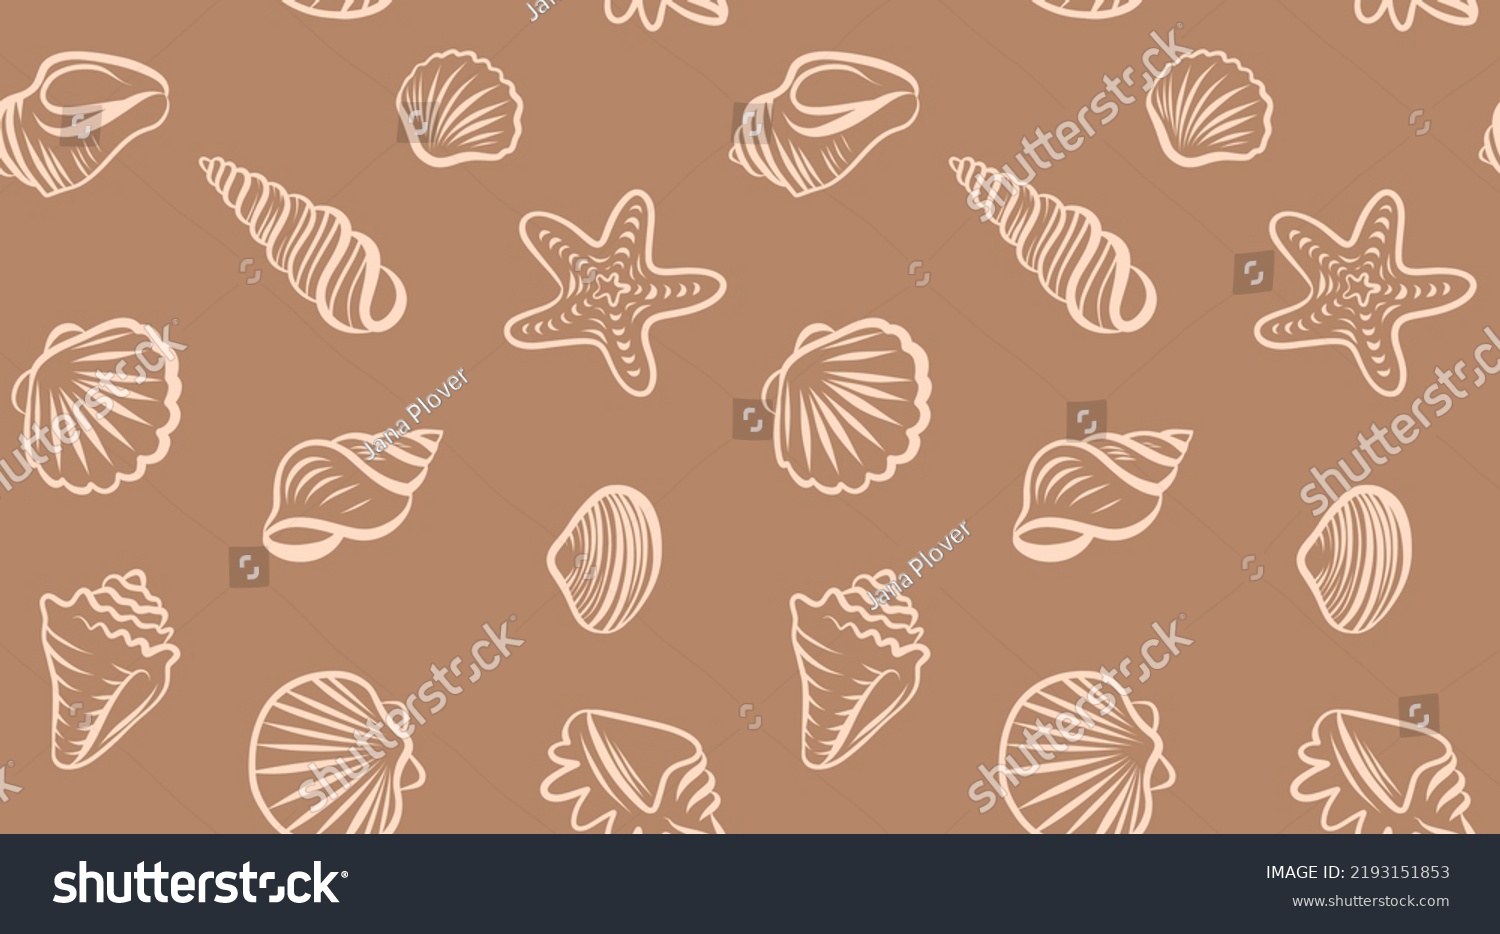 Vector seamless pattern on the marine theme. Different seashells and stars with a light line on a beige background. #2193151853